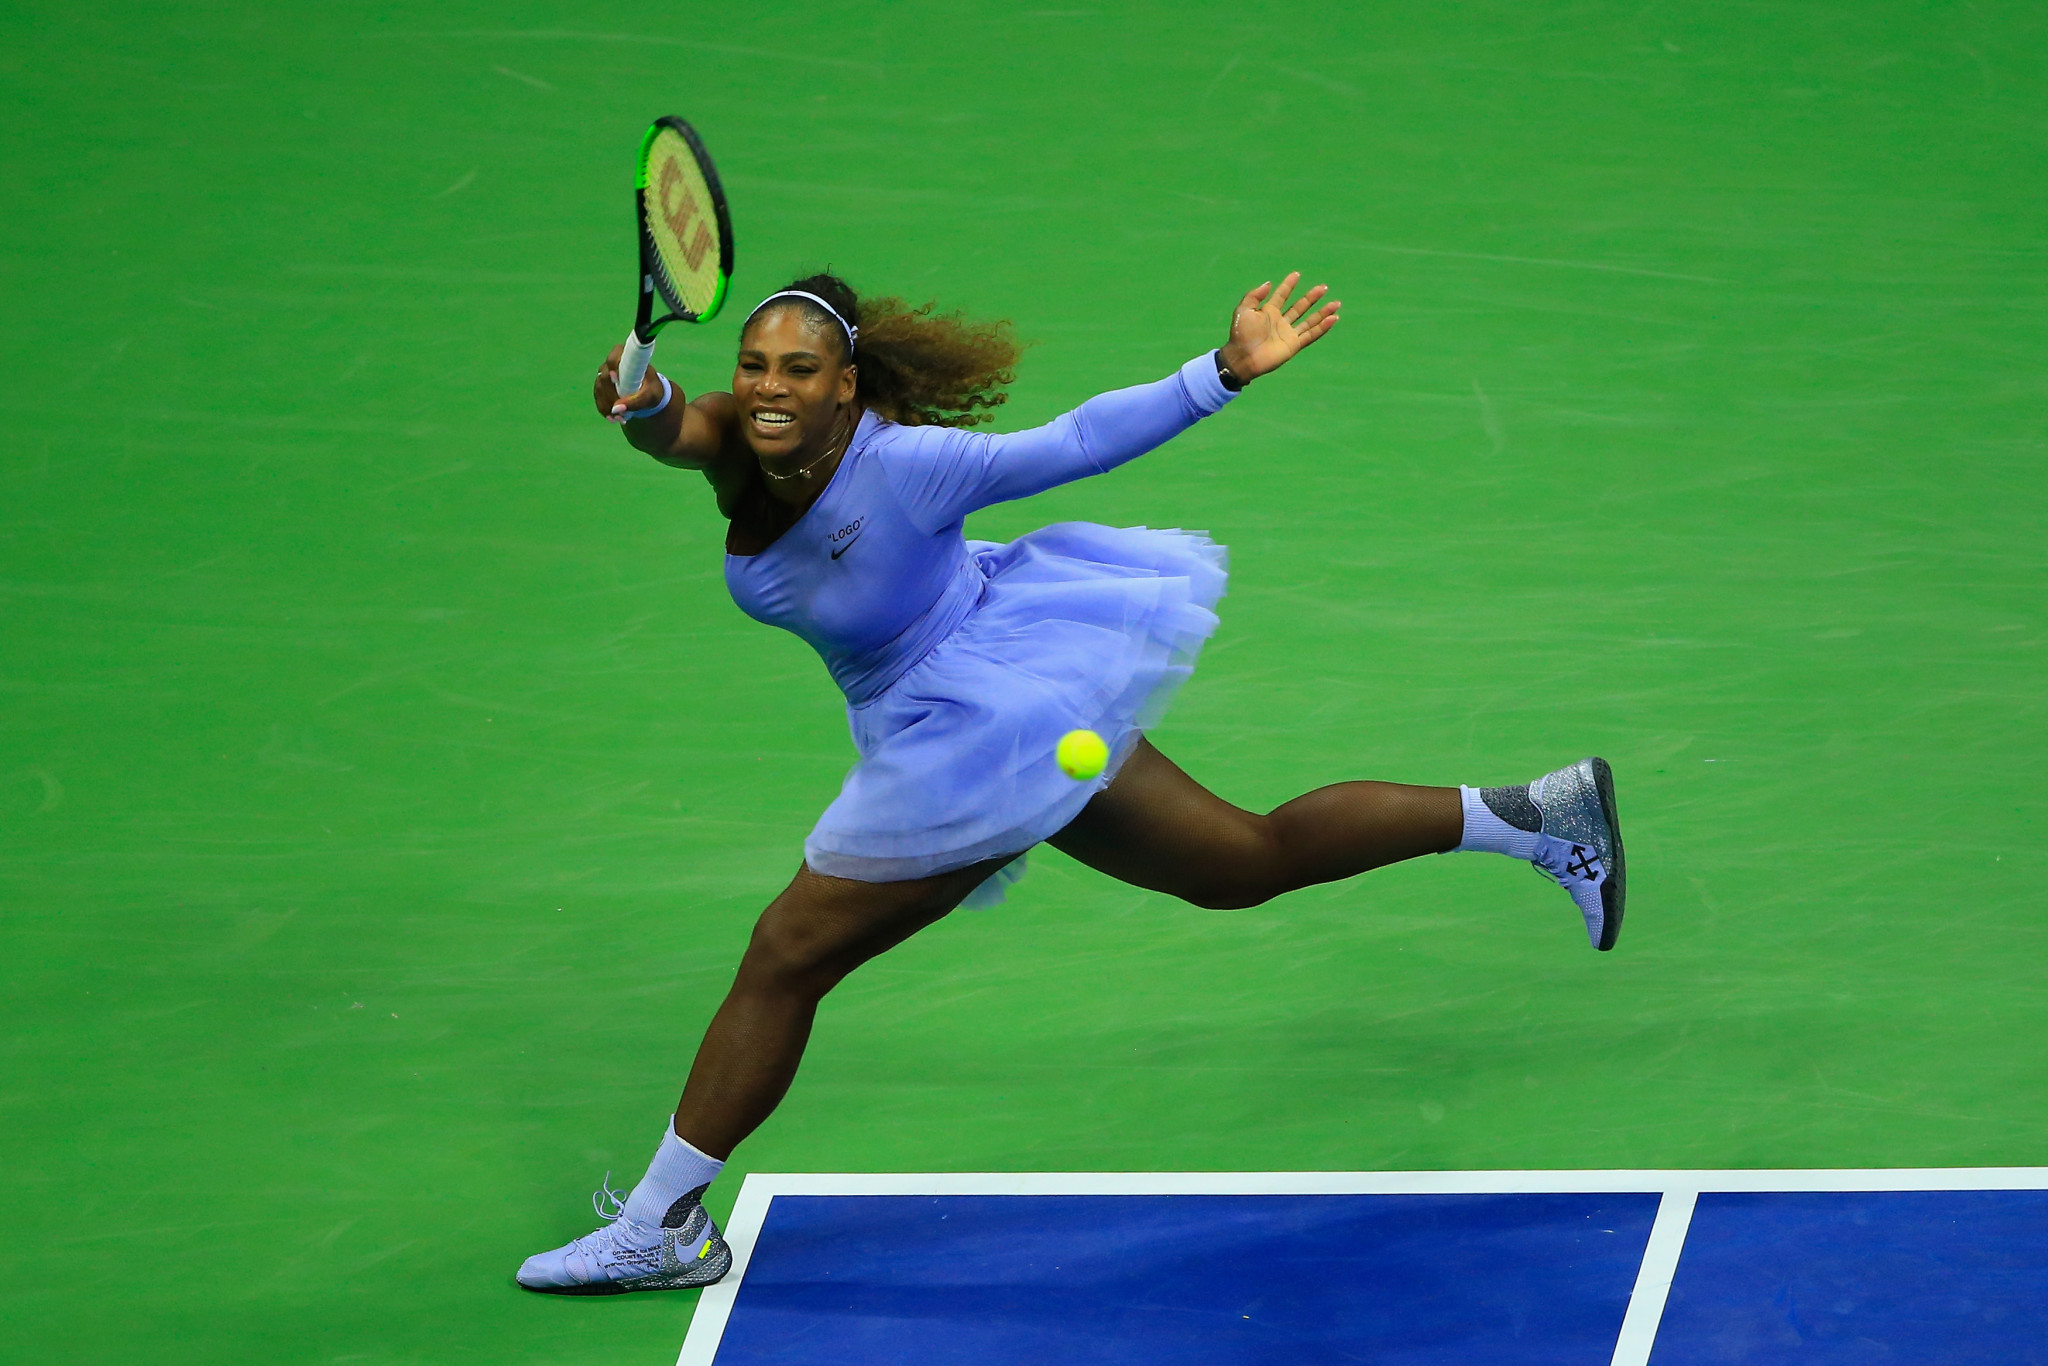 Serena Williams was also in fine form as she dispatched German world 101 Carina Witthoft 6-2, 6-2 to set up a meeting with sister Venus ©Getty Images